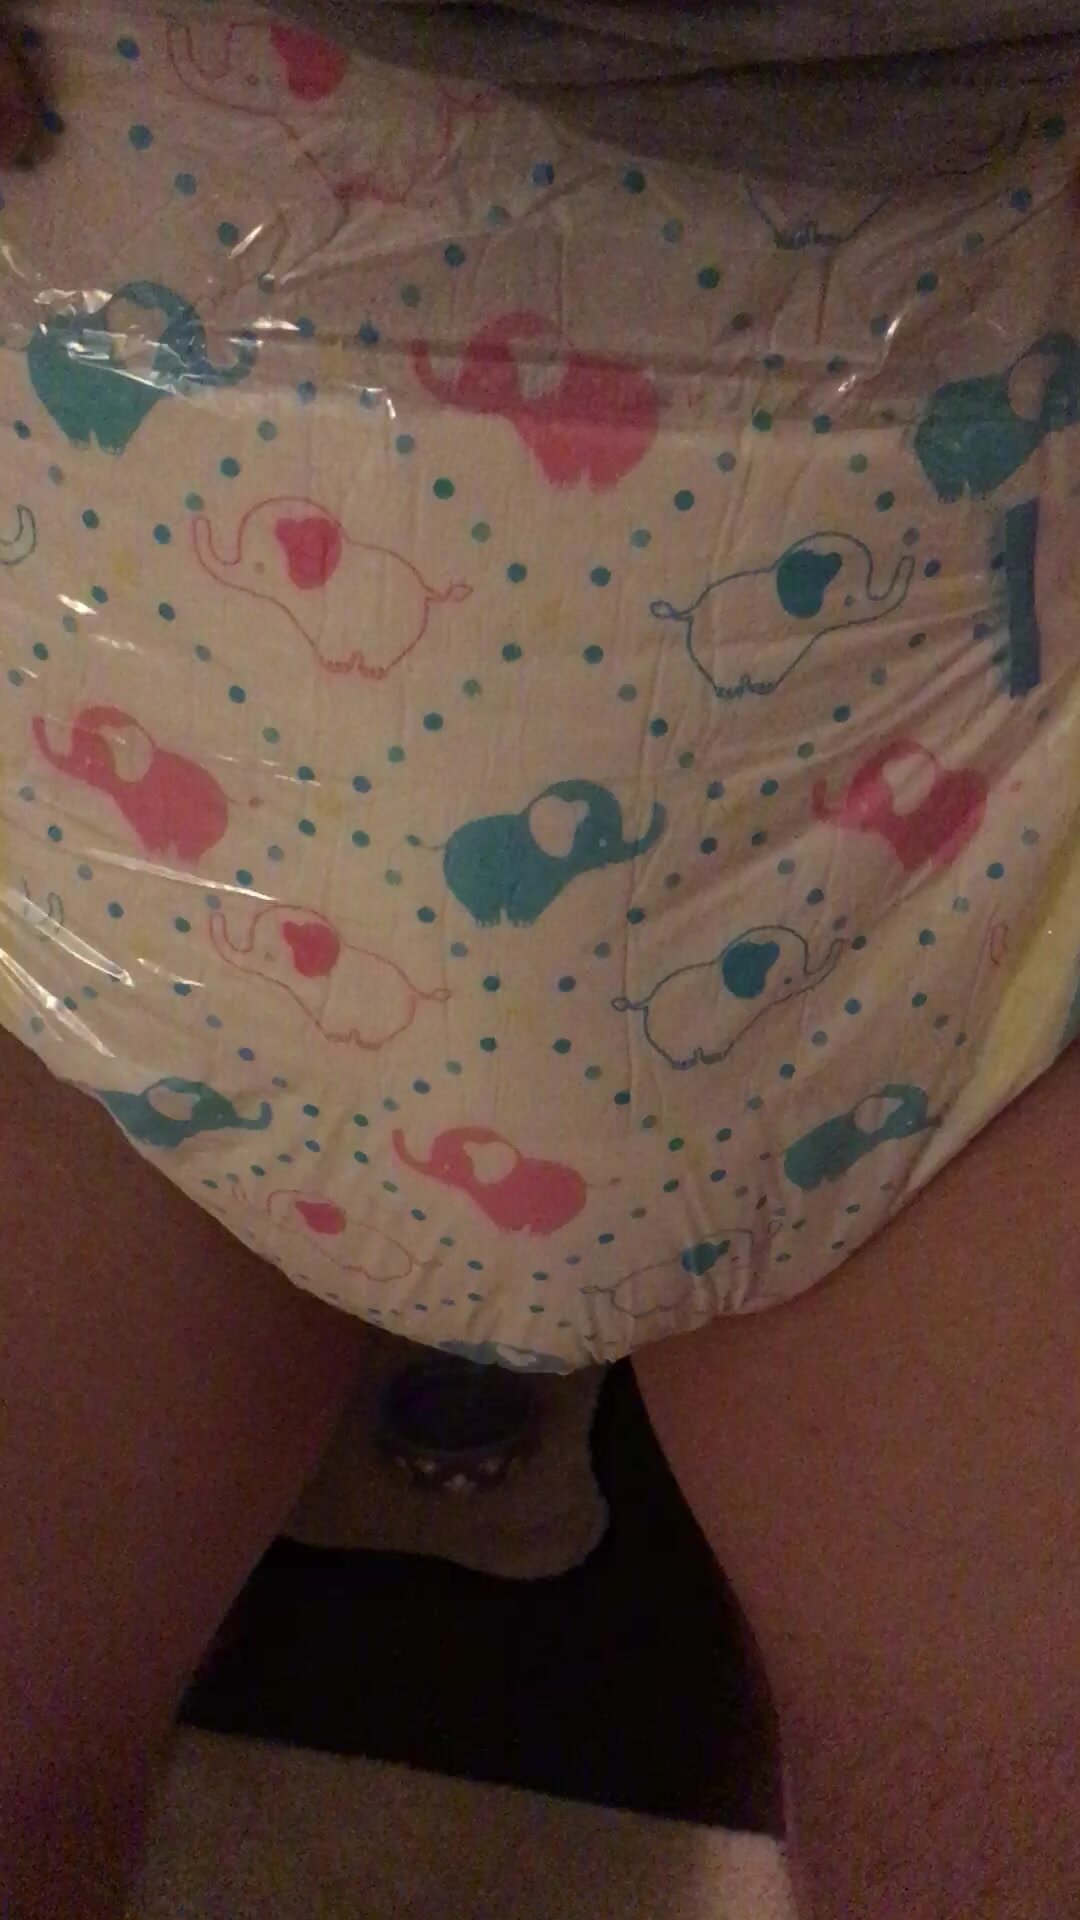 Another diaper soaking